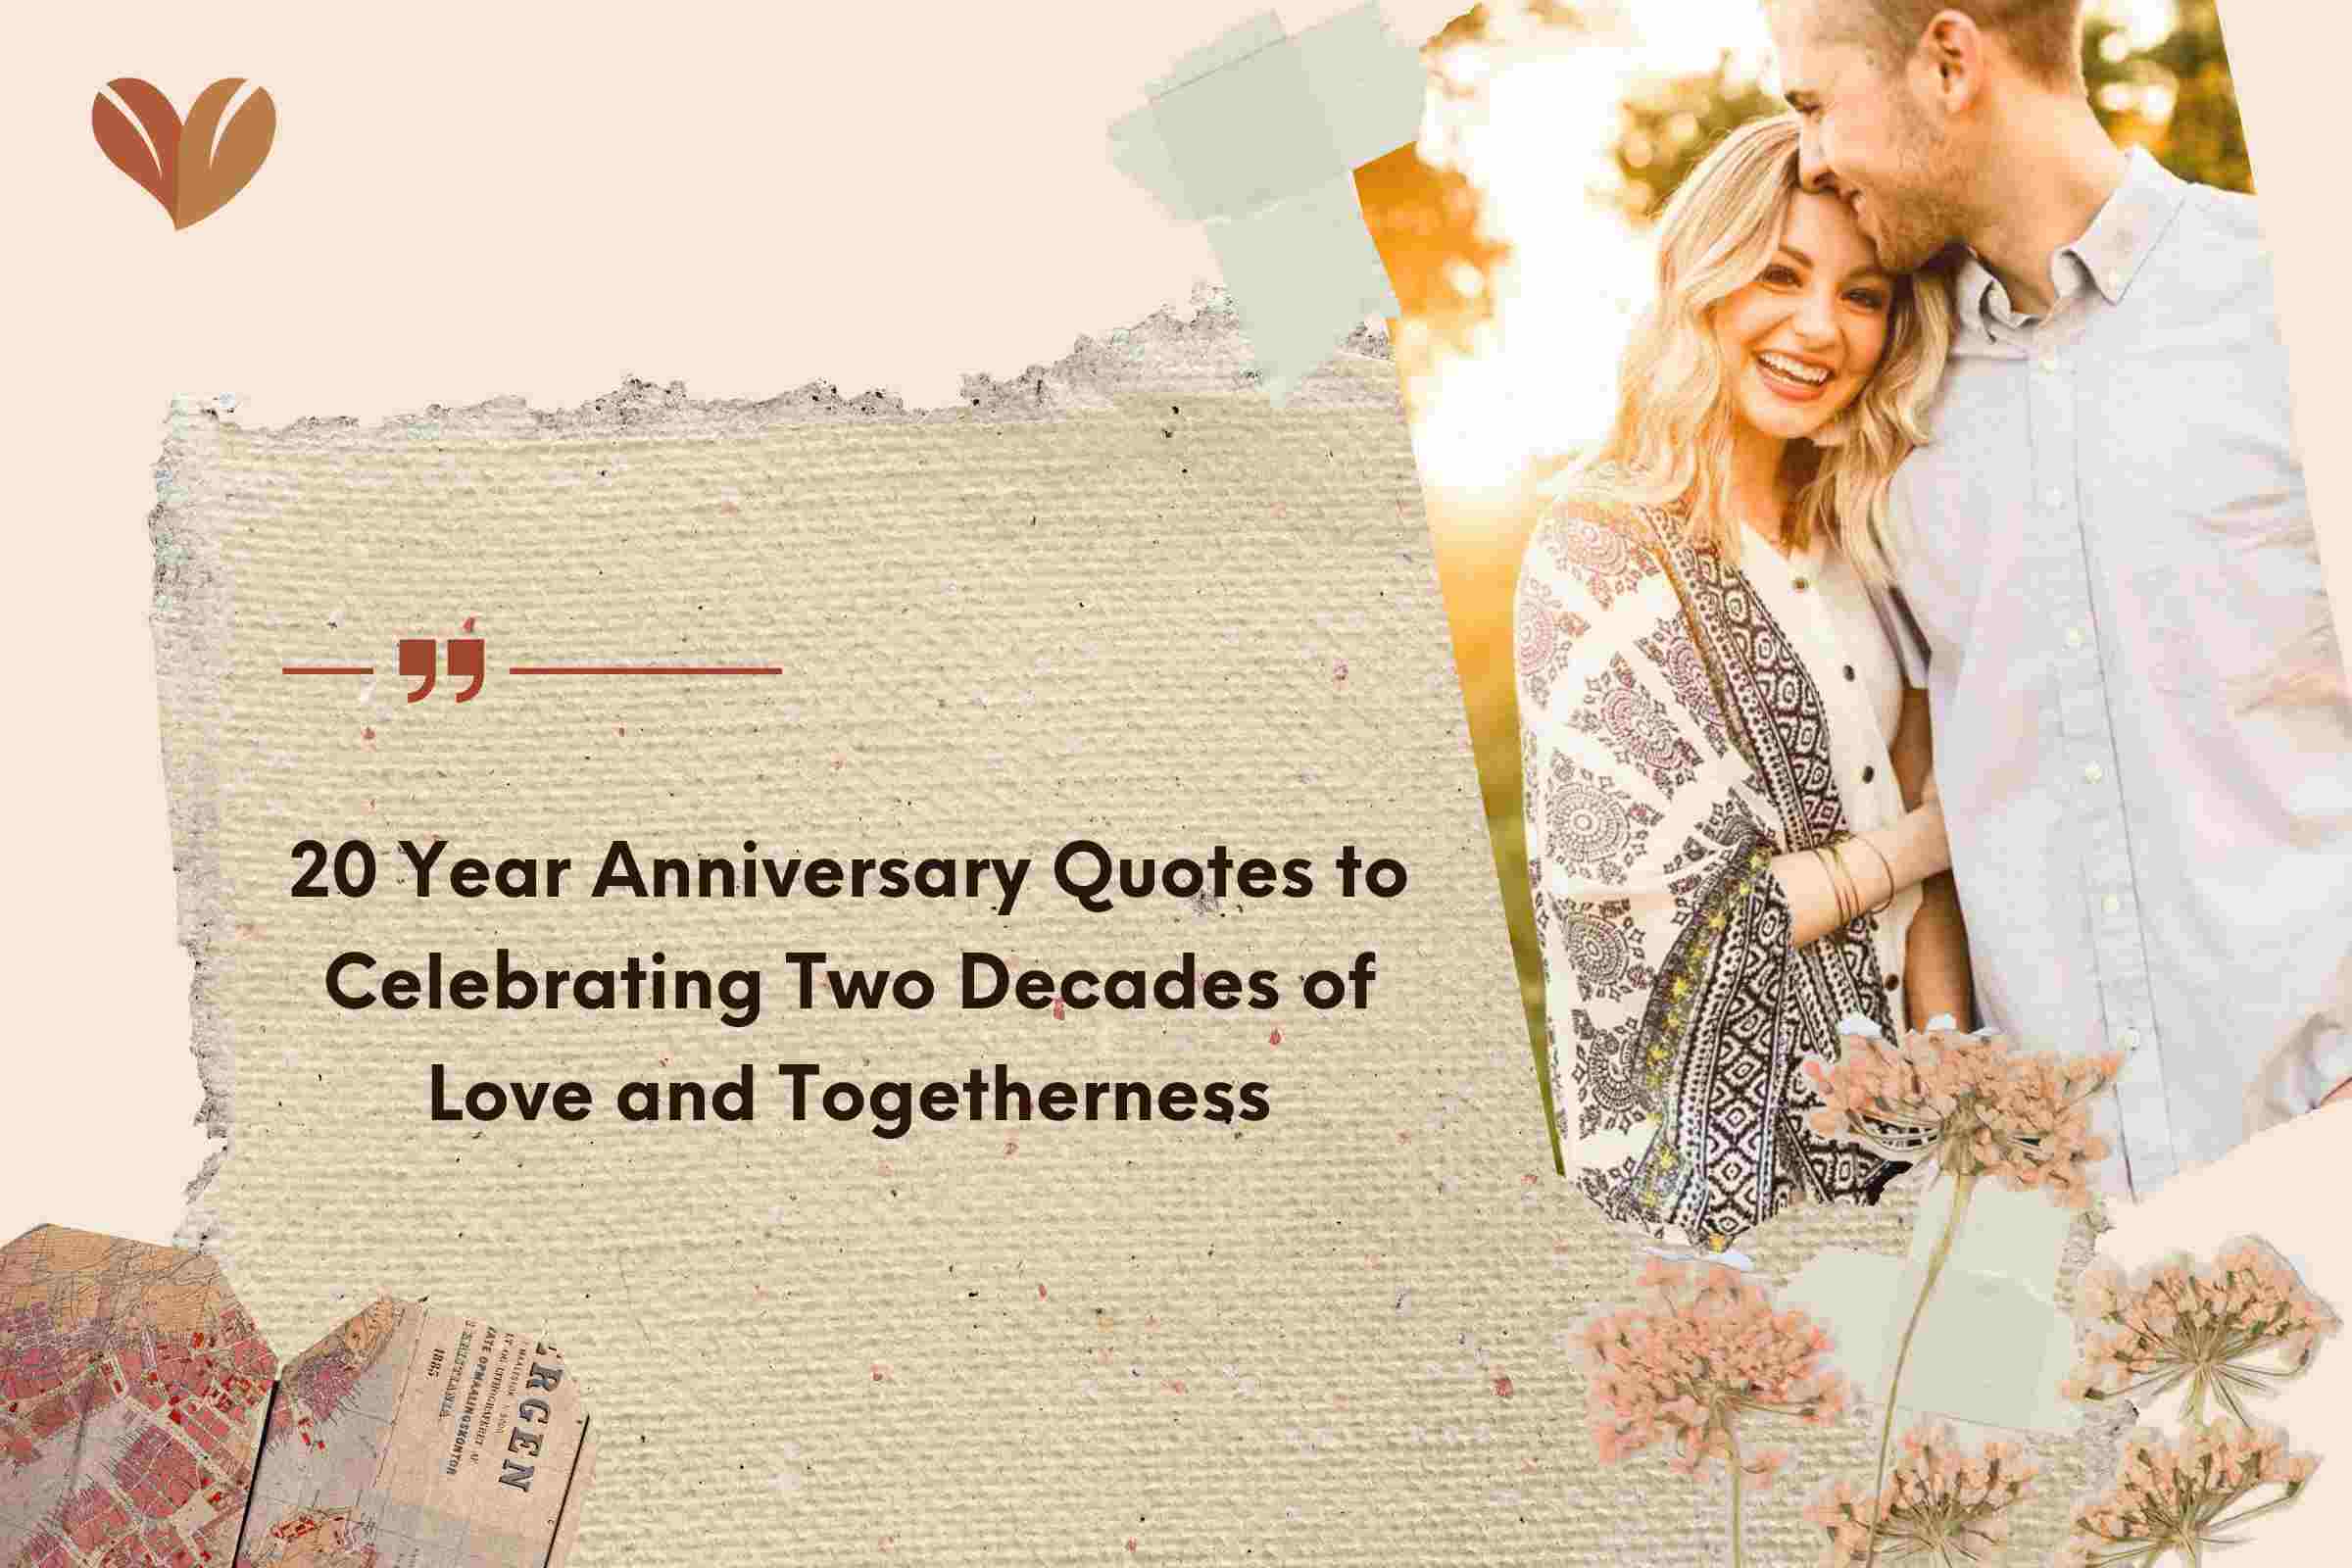 20 Year Anniversary Quotes to Celebrating Two Decades of Love and Togetherness